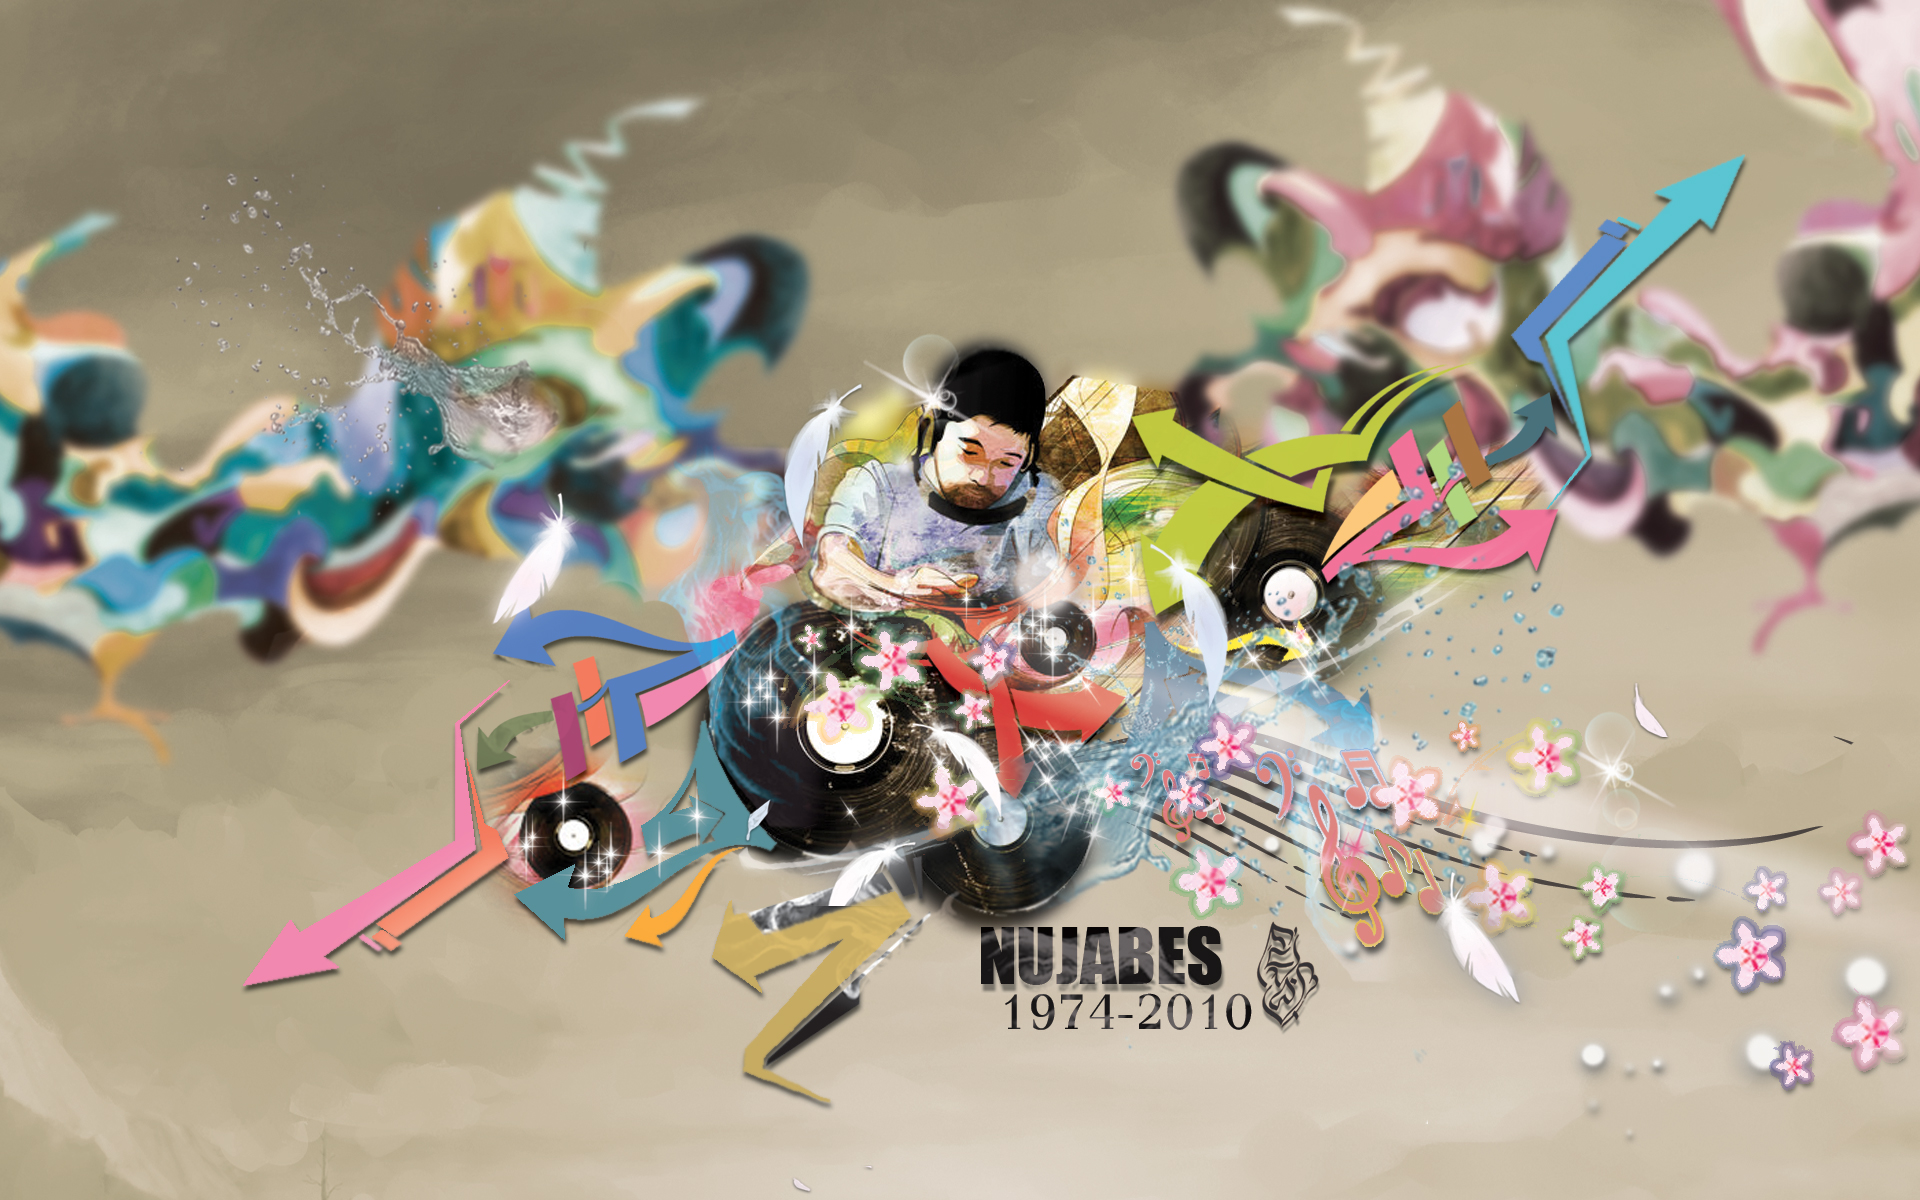 Nujabes #15